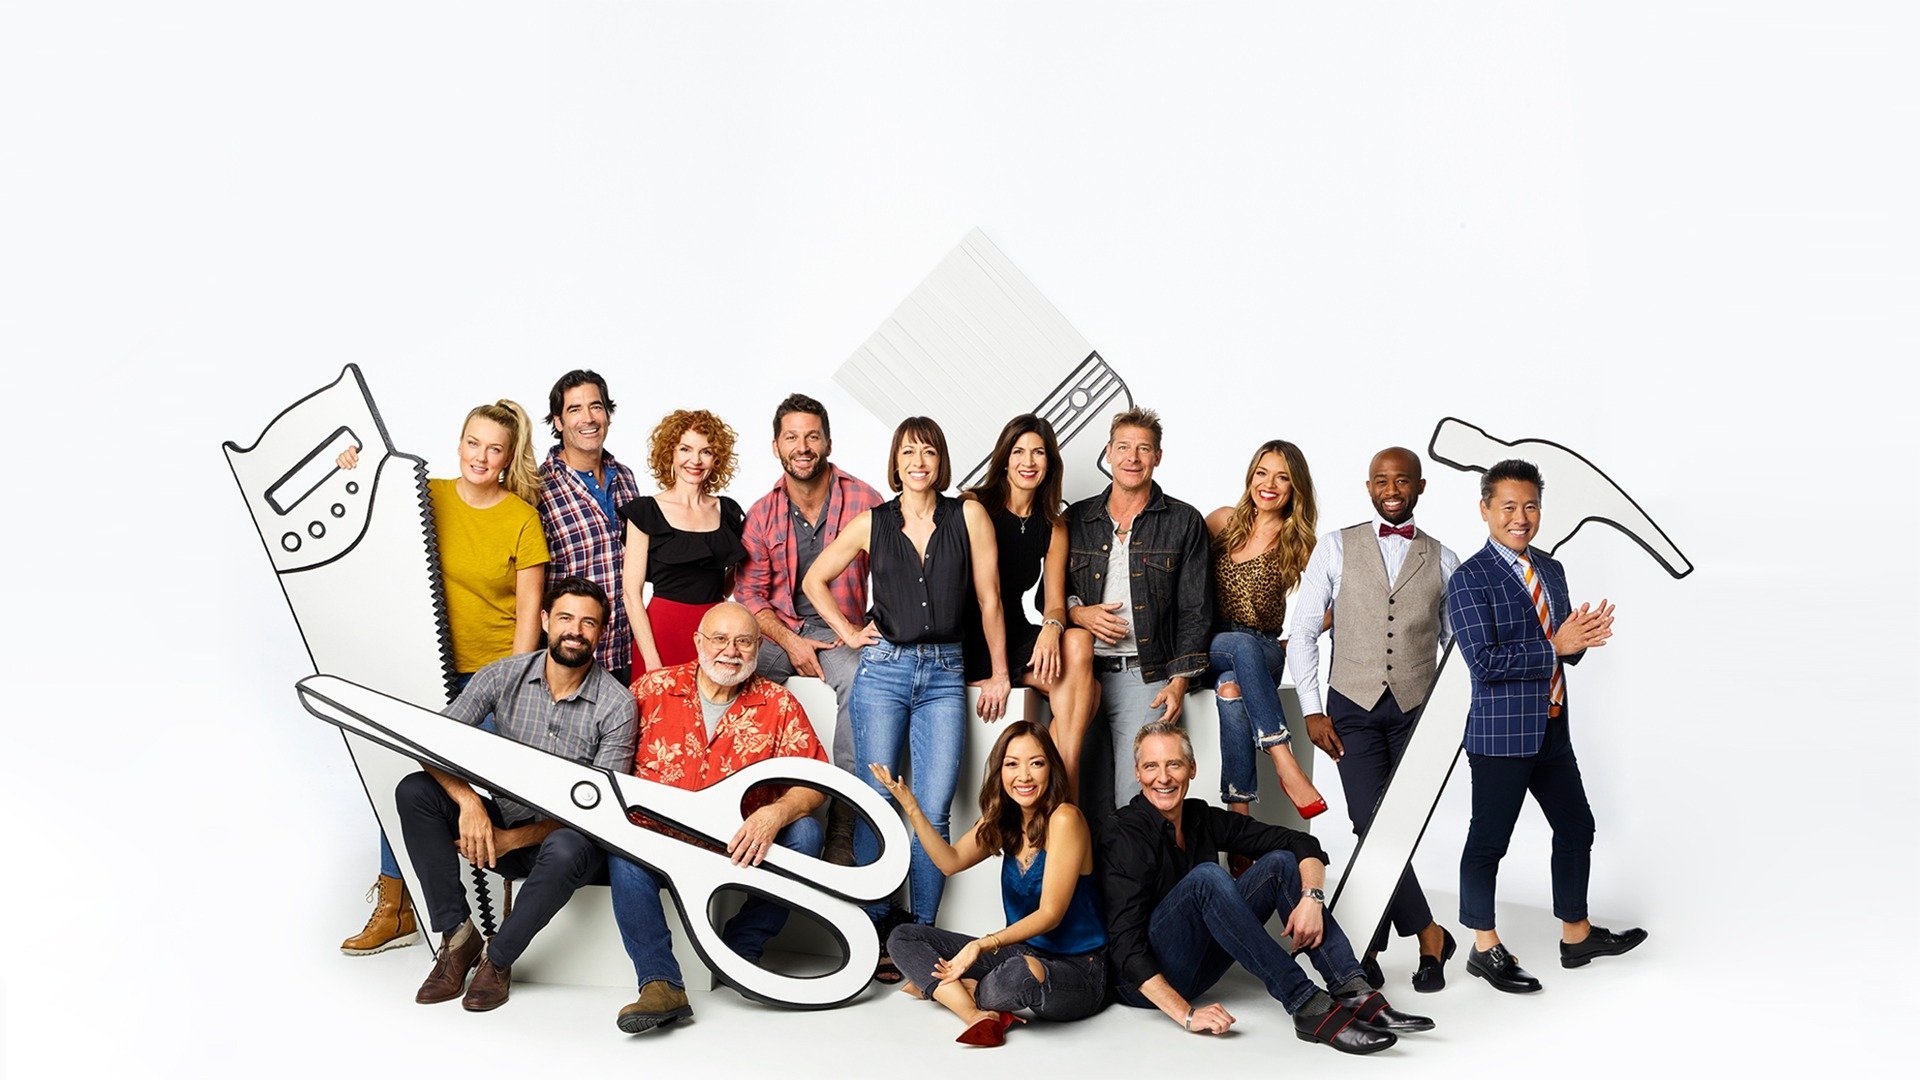 Trading Spaces episodes (TV Series 2000 Now)